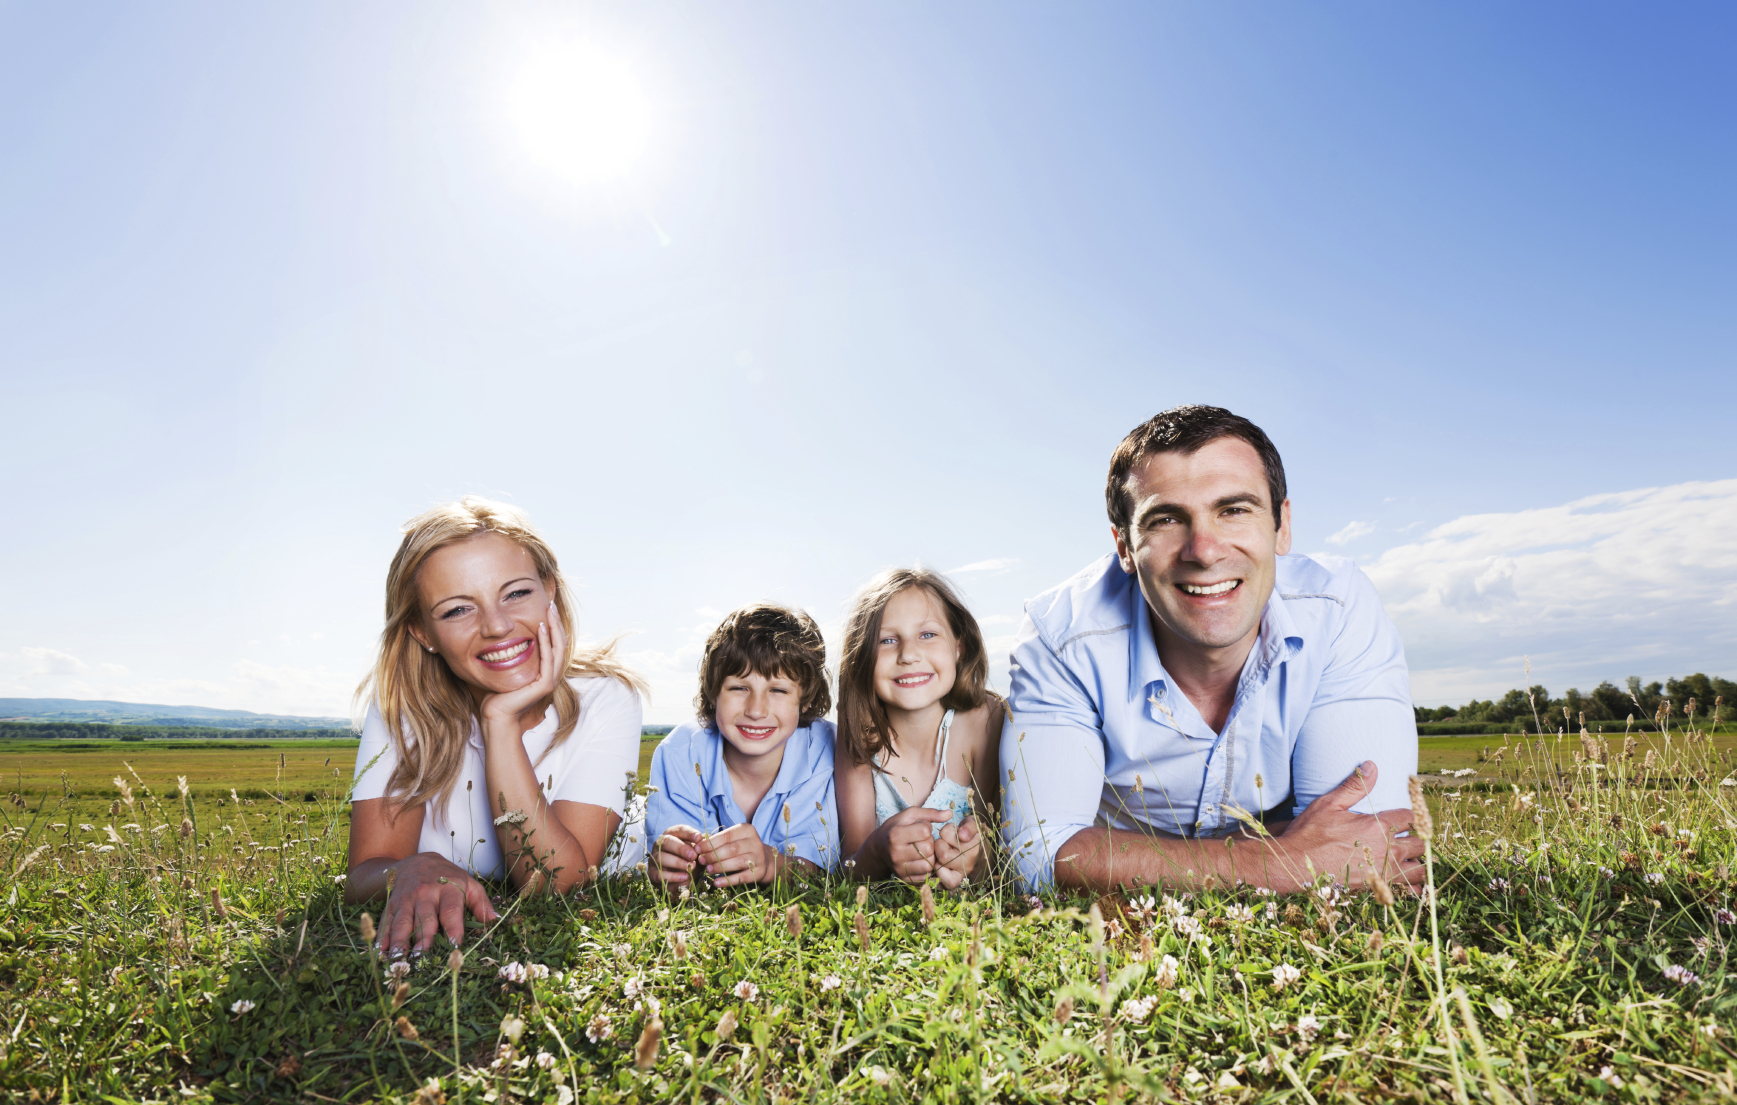 Beautiful family lying on the grass and enjoying in the nature. They are looking at the camera. 

[url=http://www.istockphoto.com/search/lightbox/9786778][img]http://dl.dropbox.com/u/40117171/family.jpg[/img][/url]

[url=http://www.istockphoto.com/search/lightbox/9786750][img]http://dl.dropbox.com/u/40117171/summer.jpg[/img][/url]